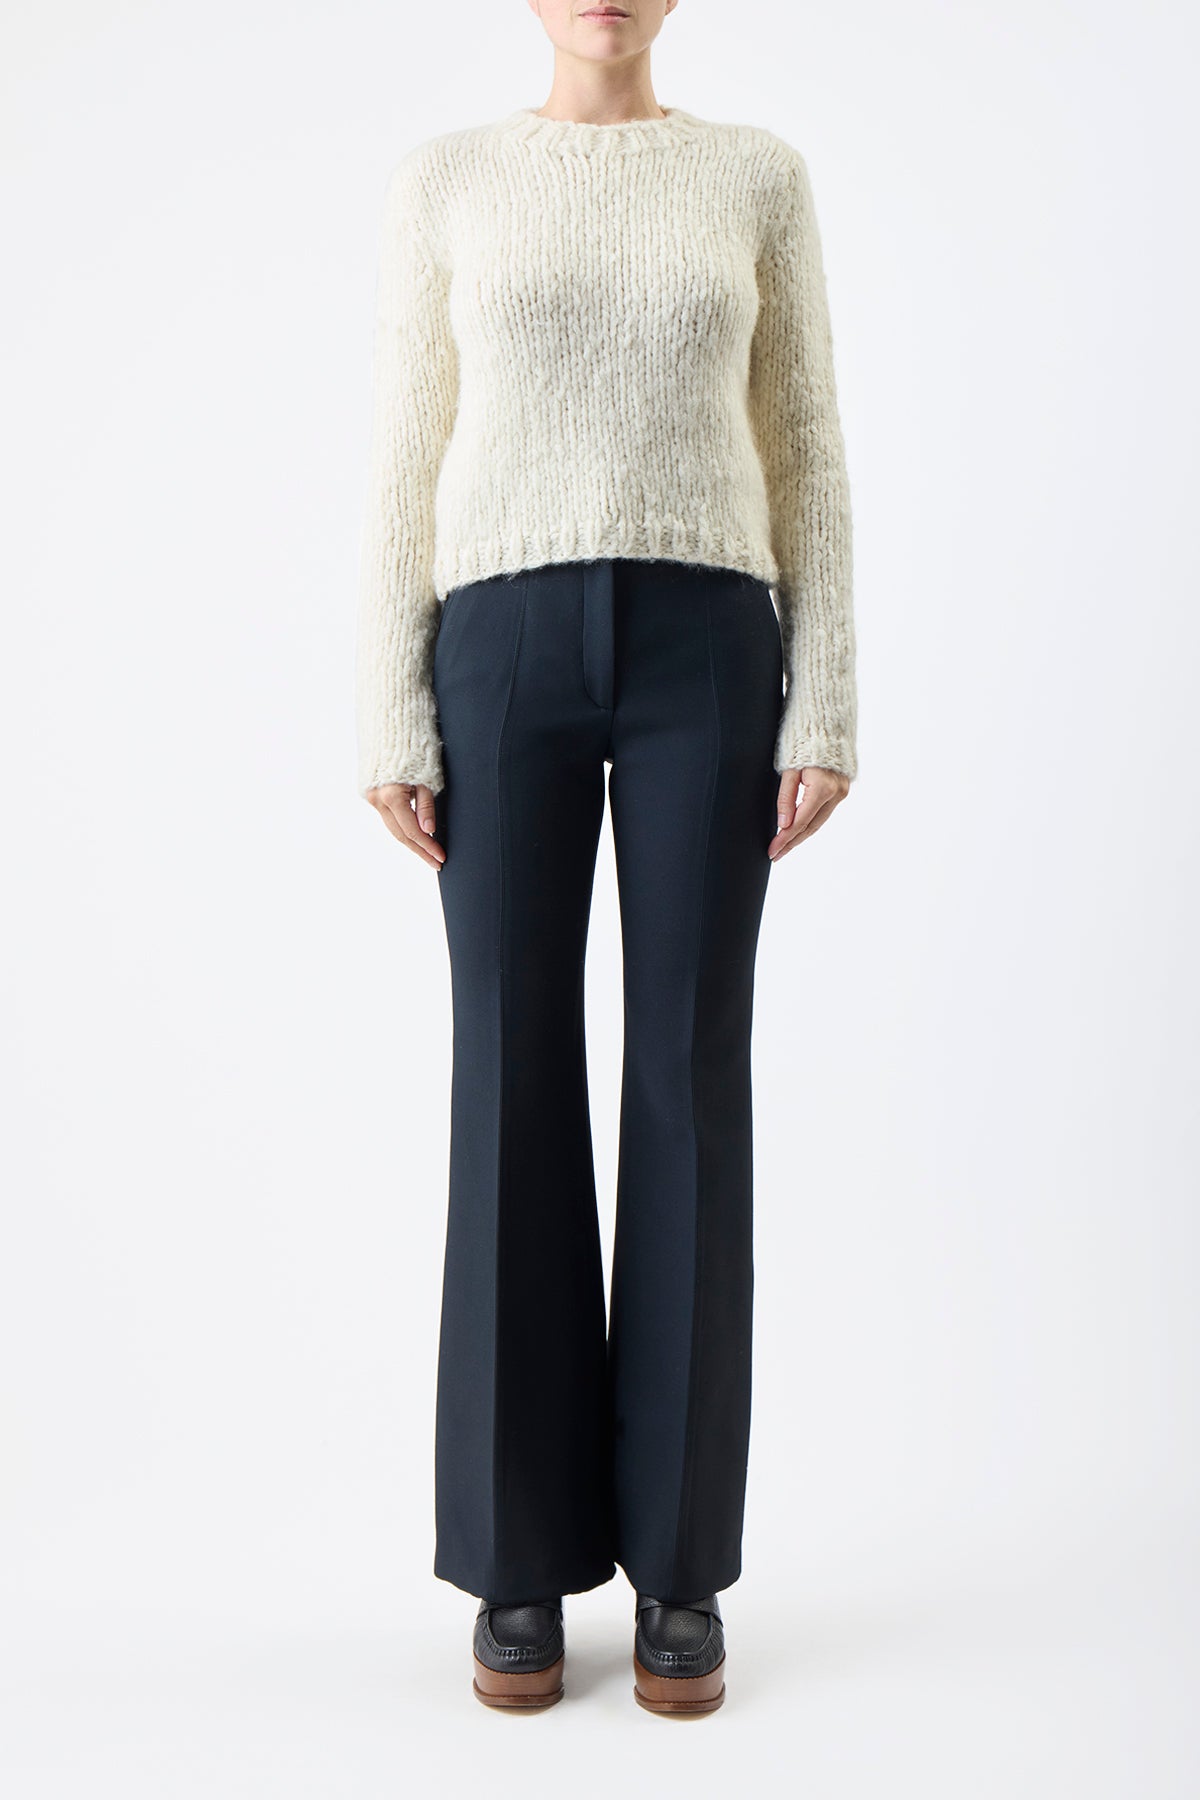 Dalton Knit Sweater in Ivory Welfat Cashmere